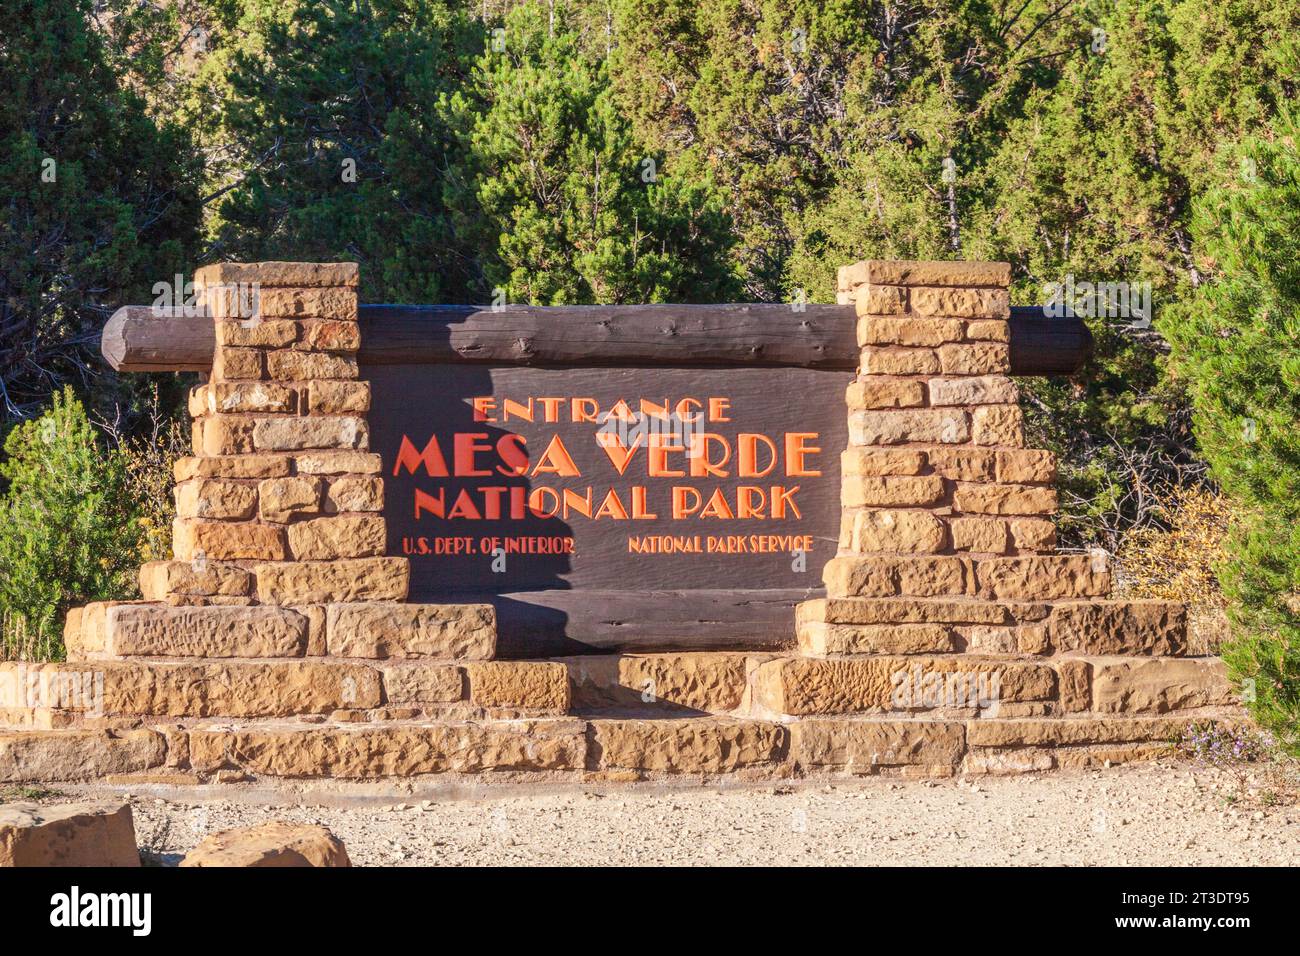 Sign at Mesa Verde National Park in Colorado. Mesa Verde was designated a National Park in 1906 to protect the well-preserved Cliff Dwellings. Stock Photo